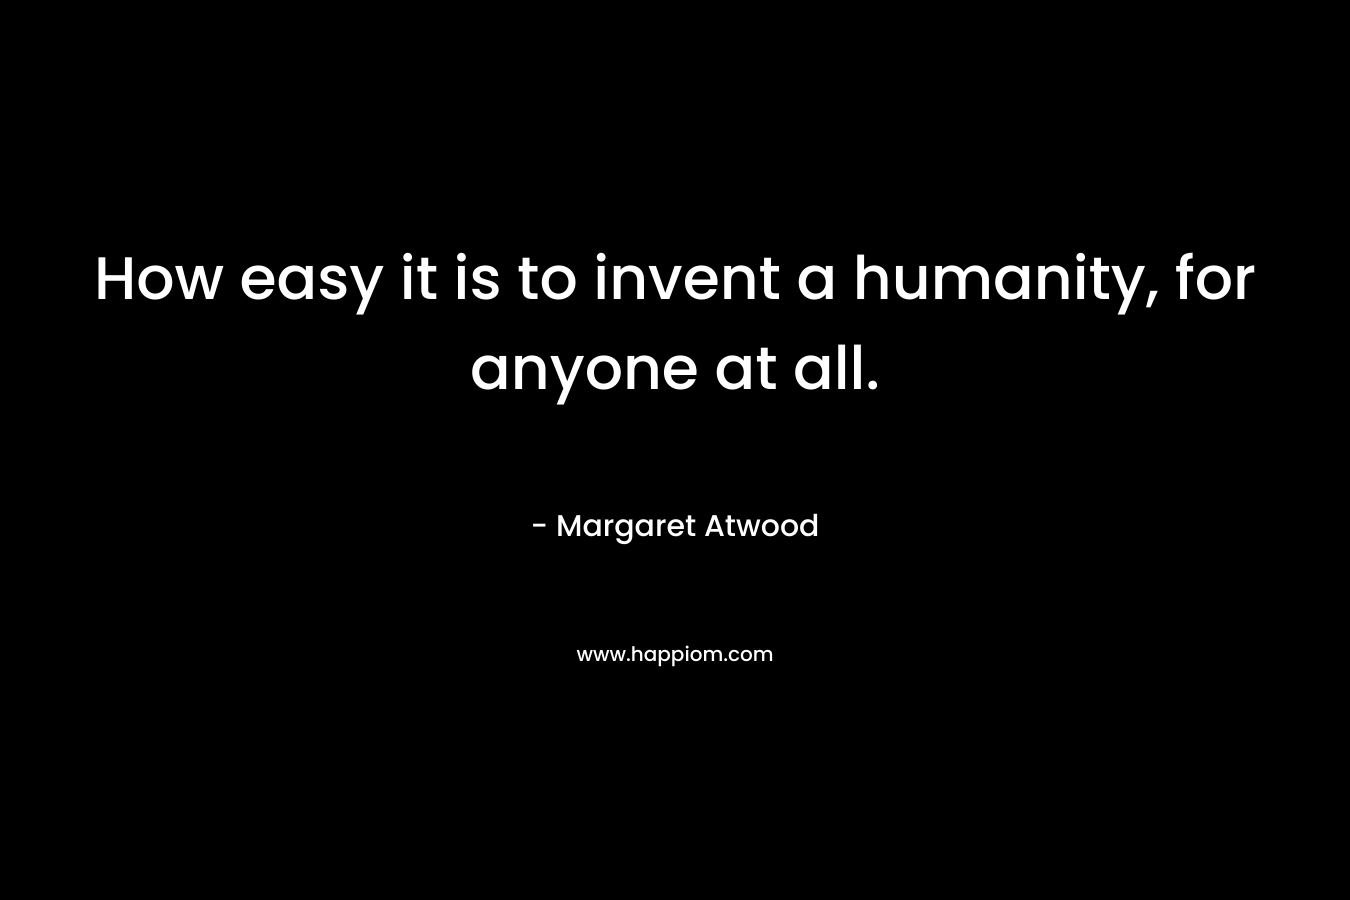 How easy it is to invent a humanity, for anyone at all.